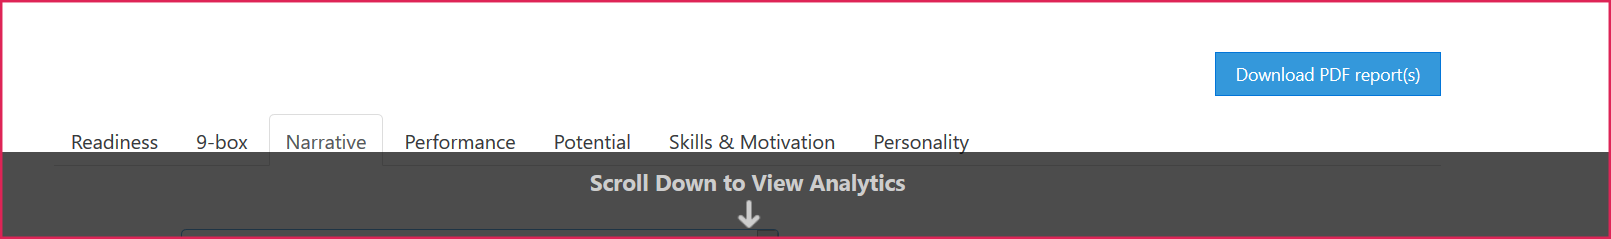 Scroll down to view analytics